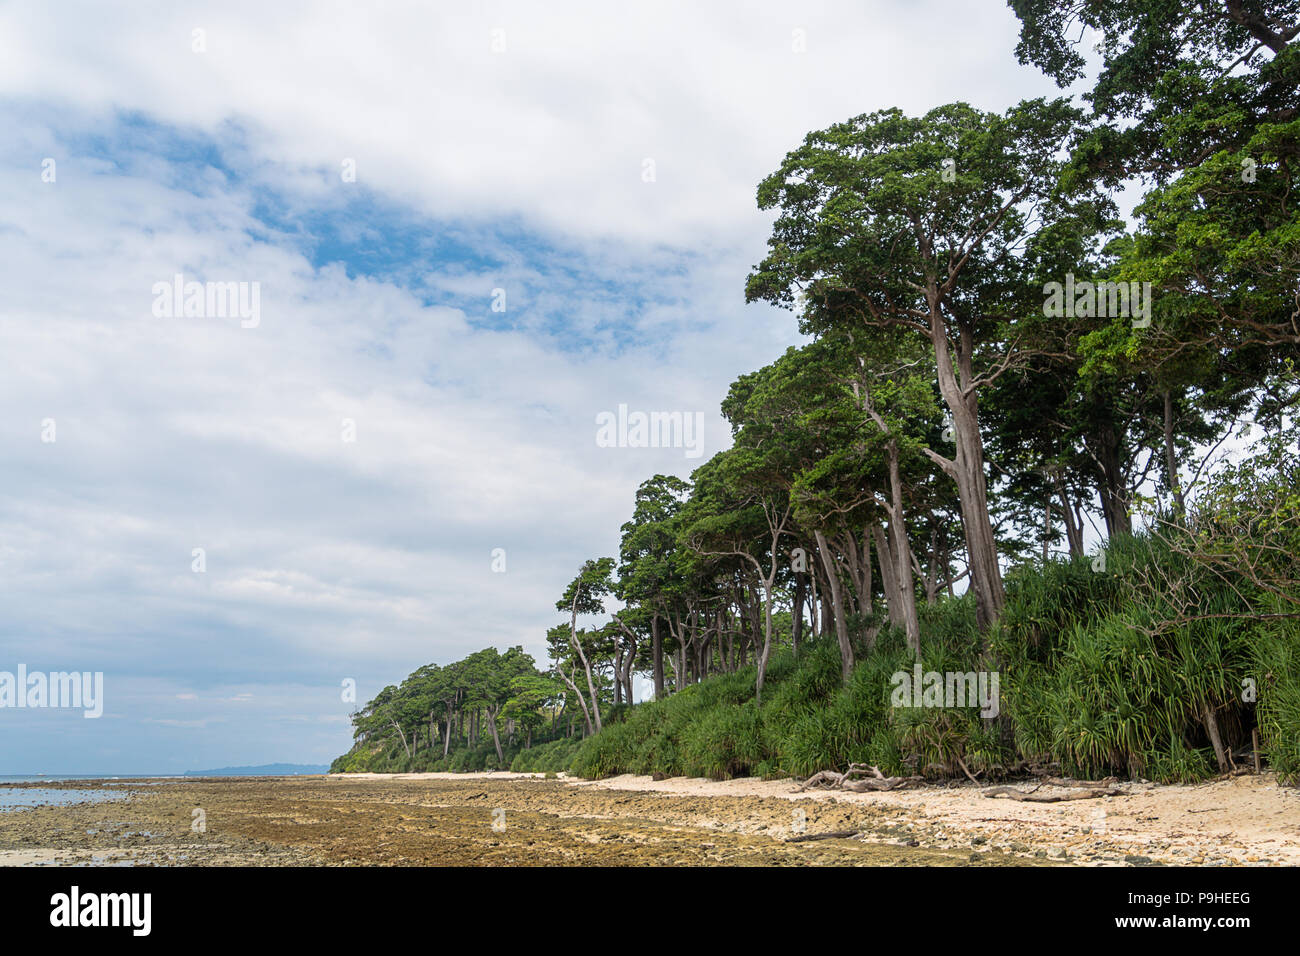 Stunning view of Neil Island with trees and bushes in the foreground. Neil Island is a beautiful small island belonging to the Andaman Nicobar Islands Stock Photo